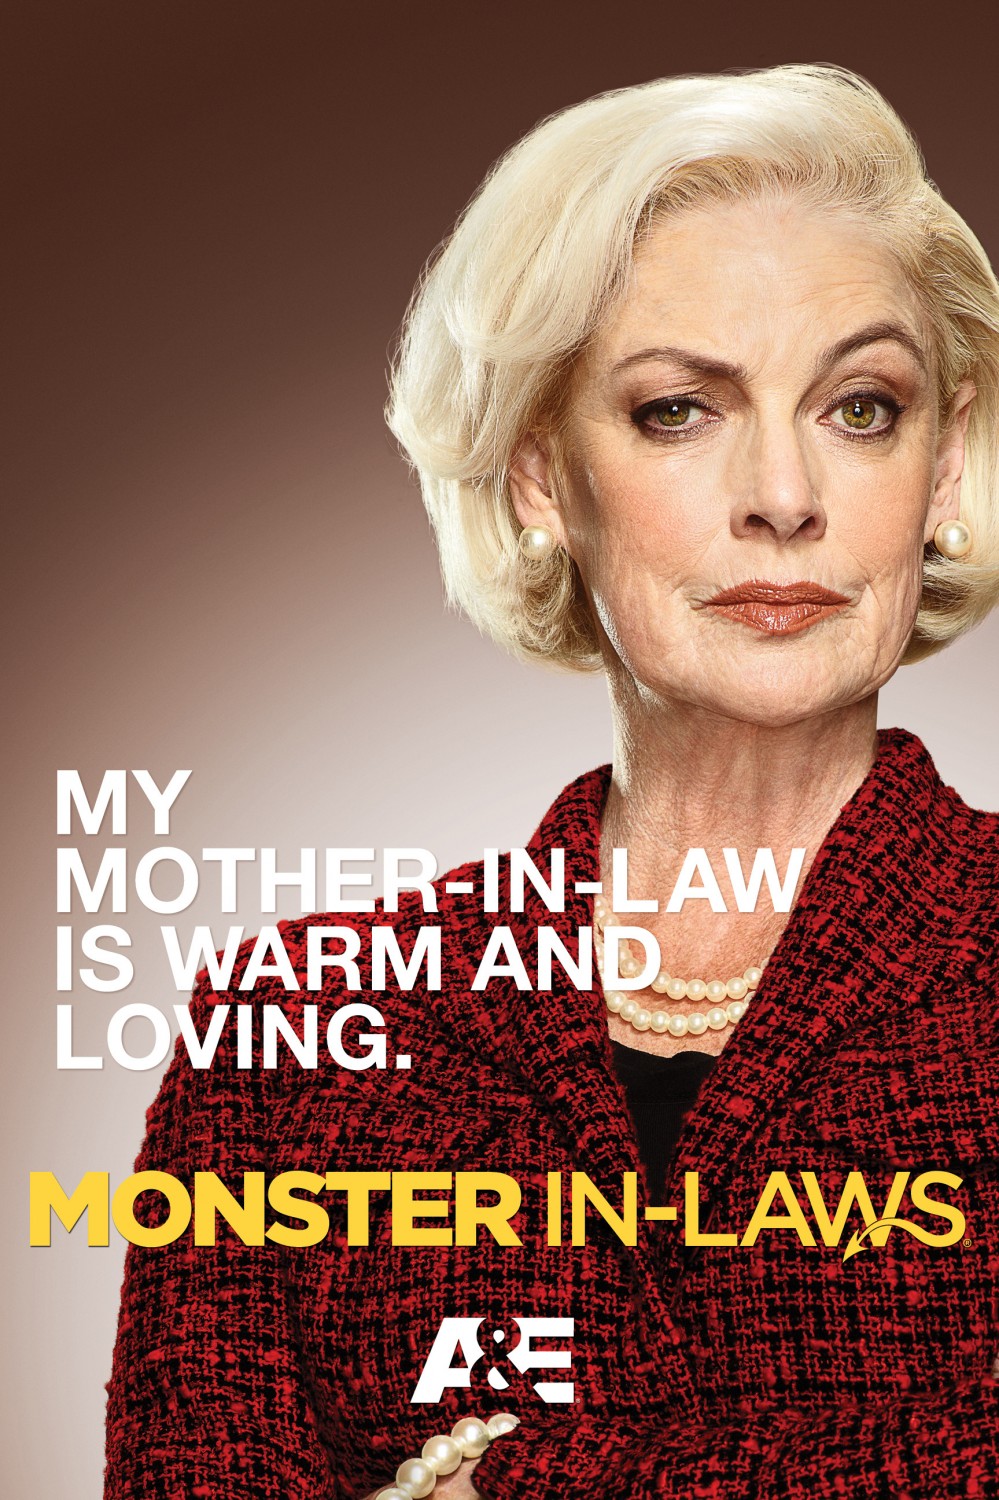 Extra Large TV Poster Image for Monster in-Laws (#1 of 2)